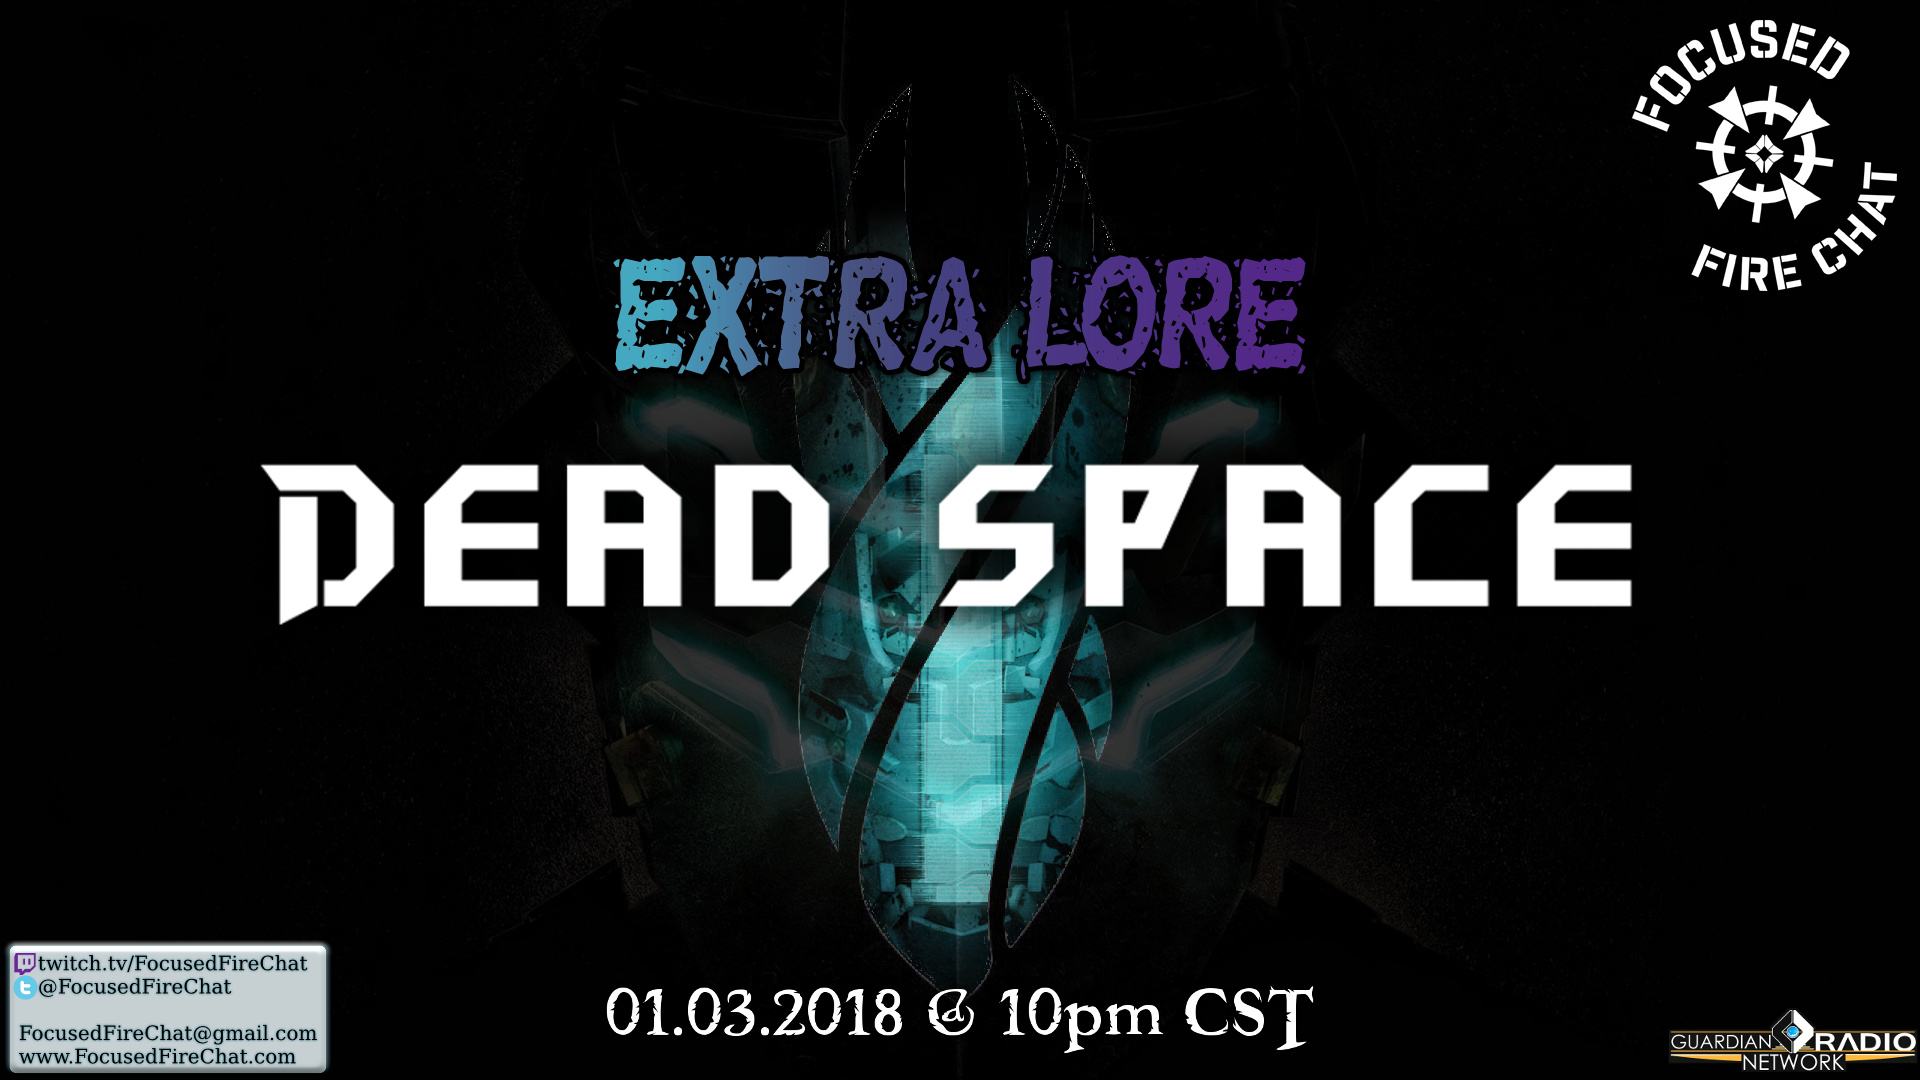 Extra Lore 22 - Dead Space